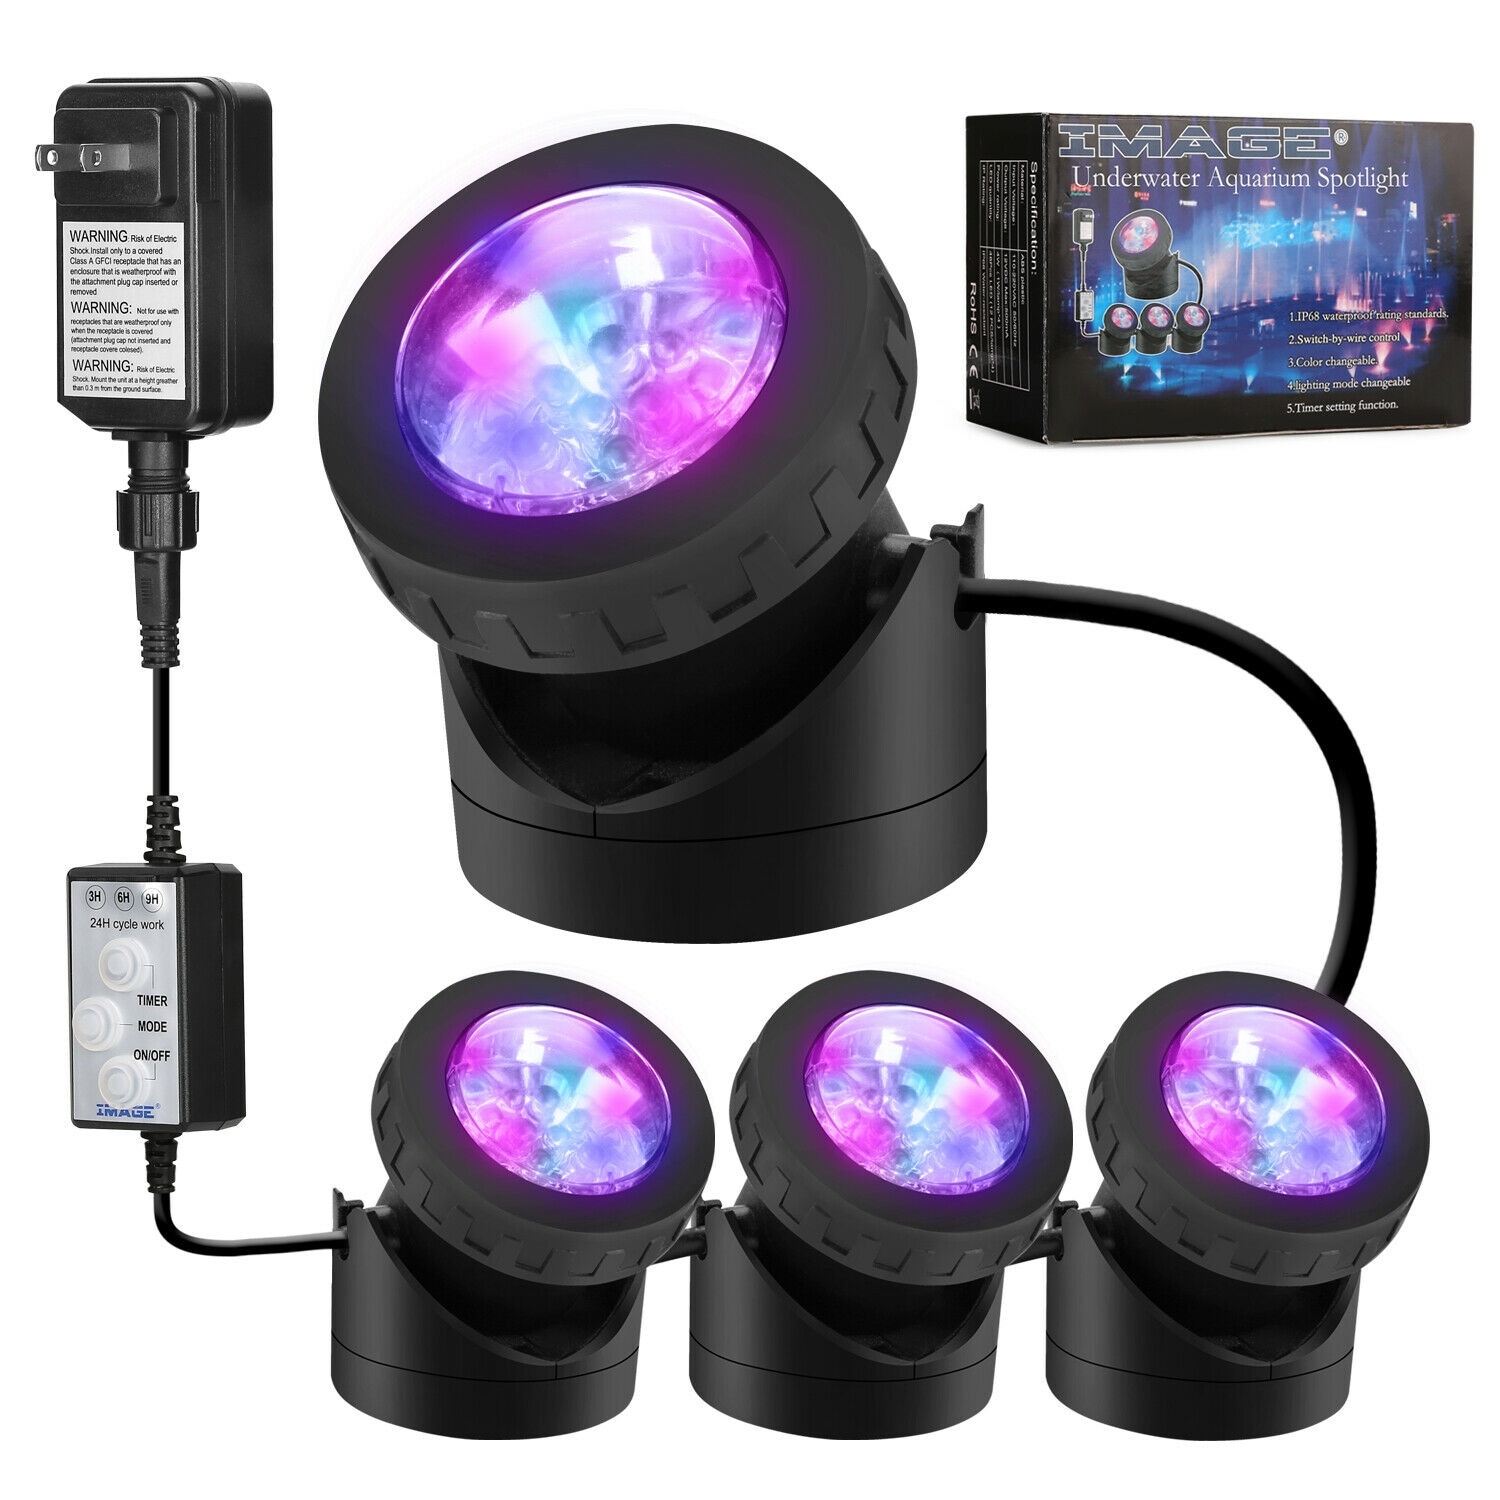 https://ak1.ostkcdn.com/images/products/is/images/direct/db829c2ed2554e1e8a46bb48778511e16736204d/48LED-Underwater-Spotlight-RGB-Pond-Lights-Submersible-Pool-Fountain-Lamp.jpg